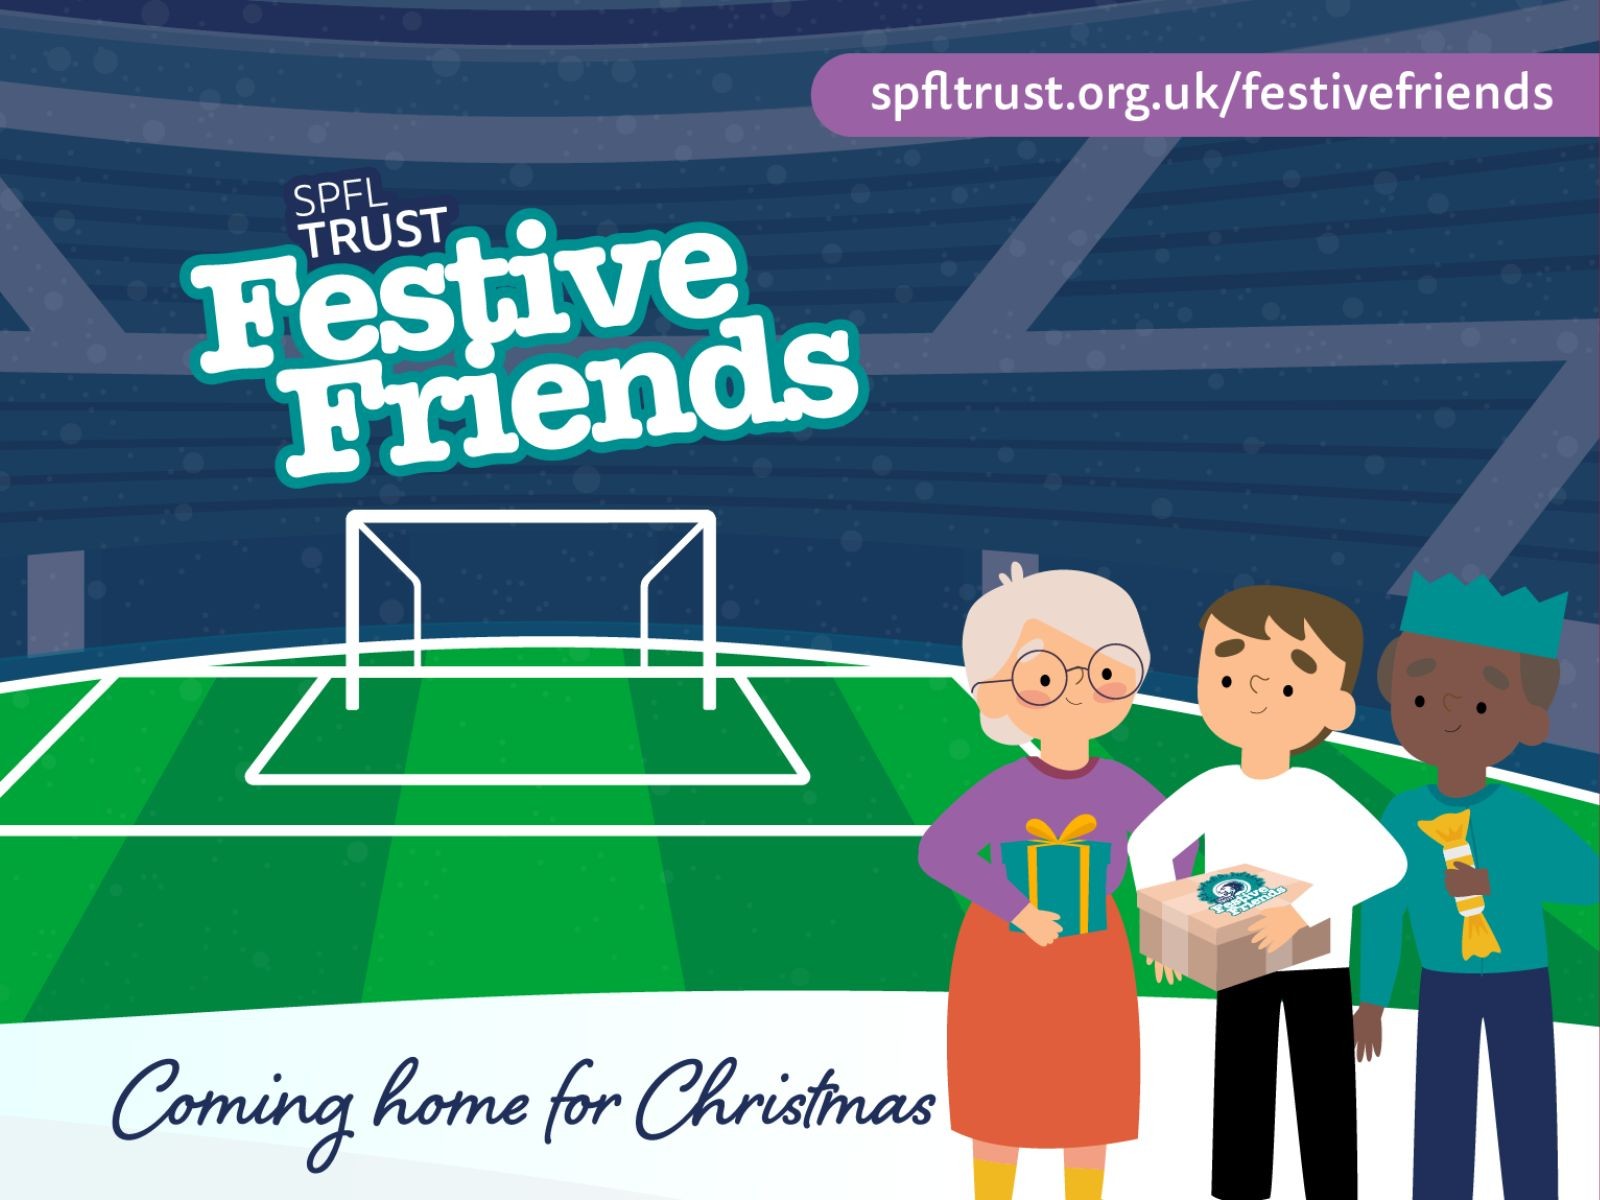  » SPFL TRUST FESTIVE FRIENDS: CHRISTMAS CHEER AND KINDNESS